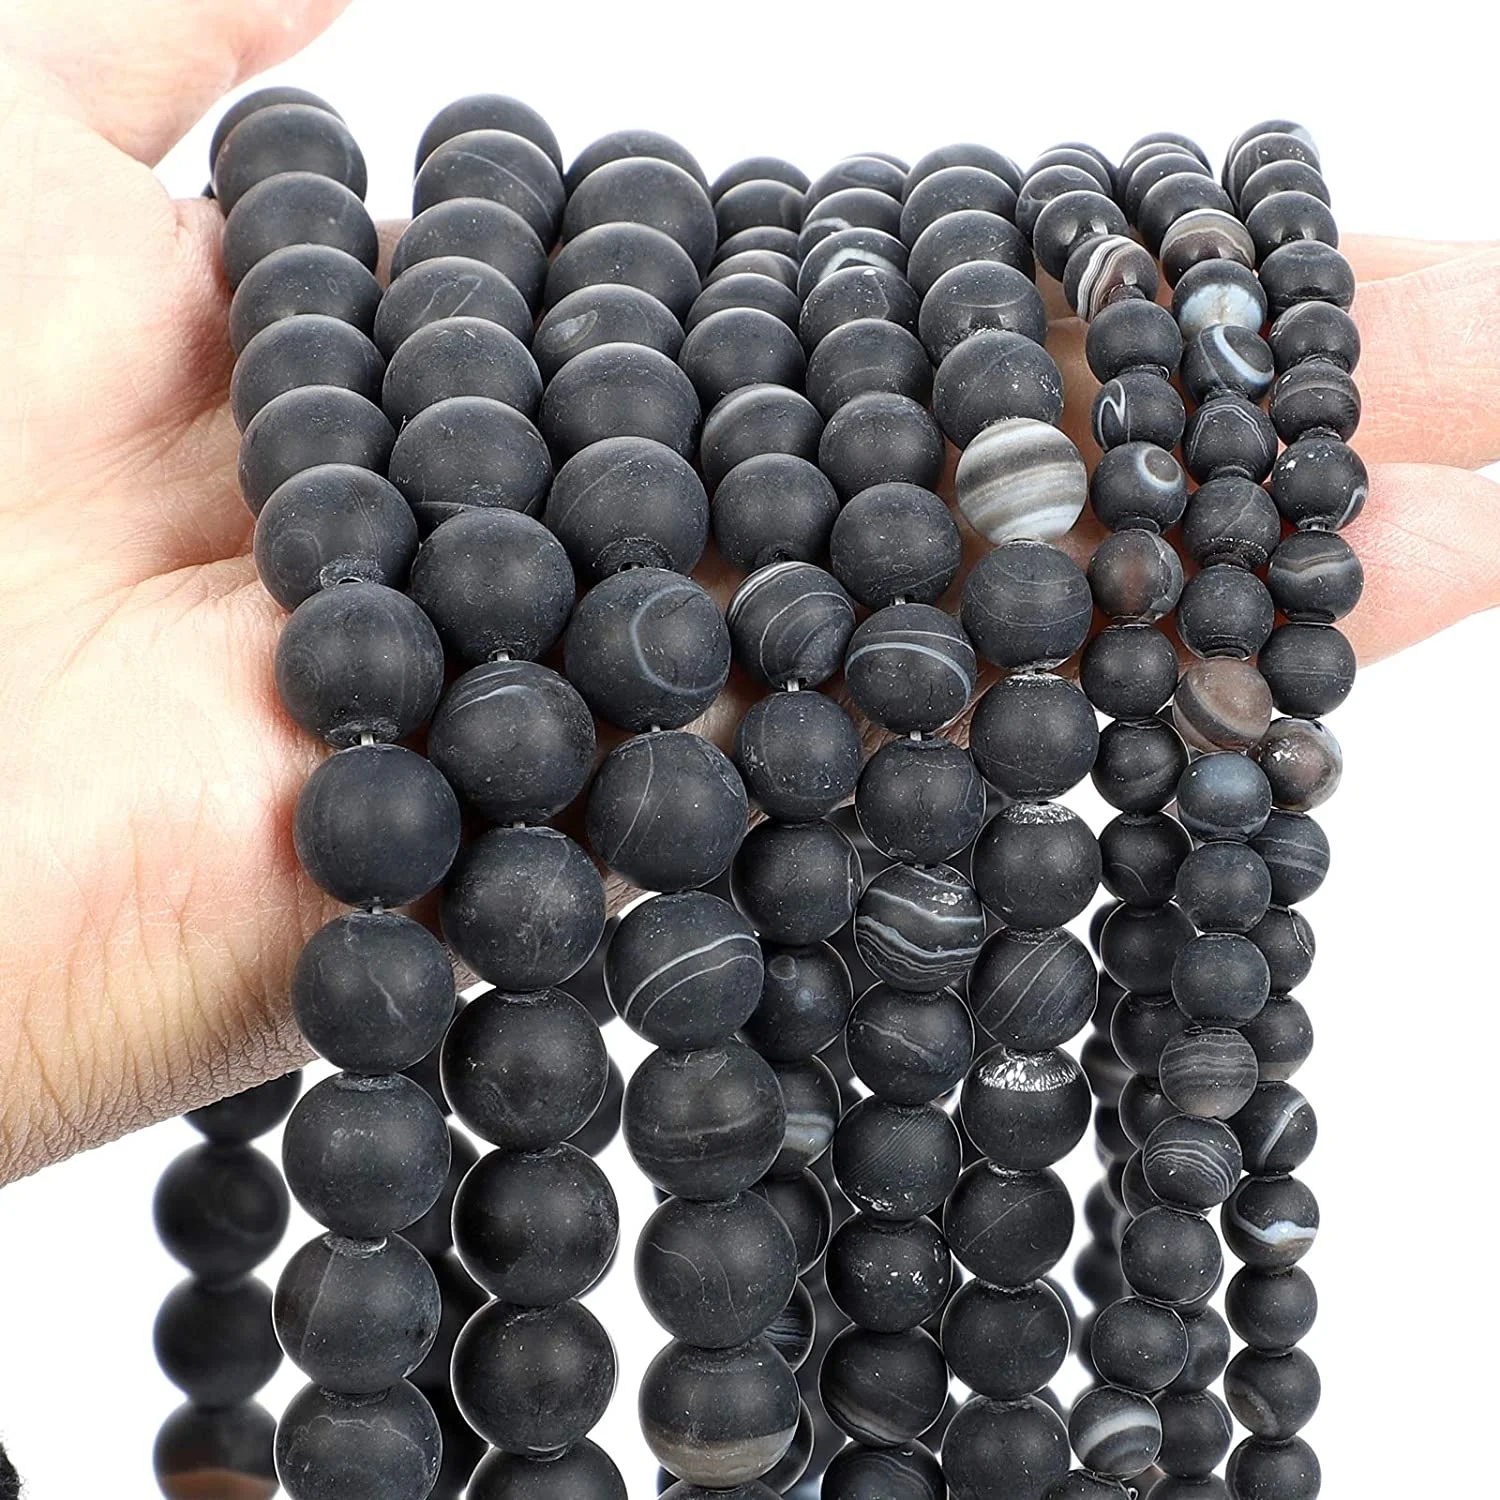 

Stripe Agate Natural Gemstone Loose Beads,8mm Matte Round Crystal Energy Stone,Healing Power Bead for DIY Jewelry Making